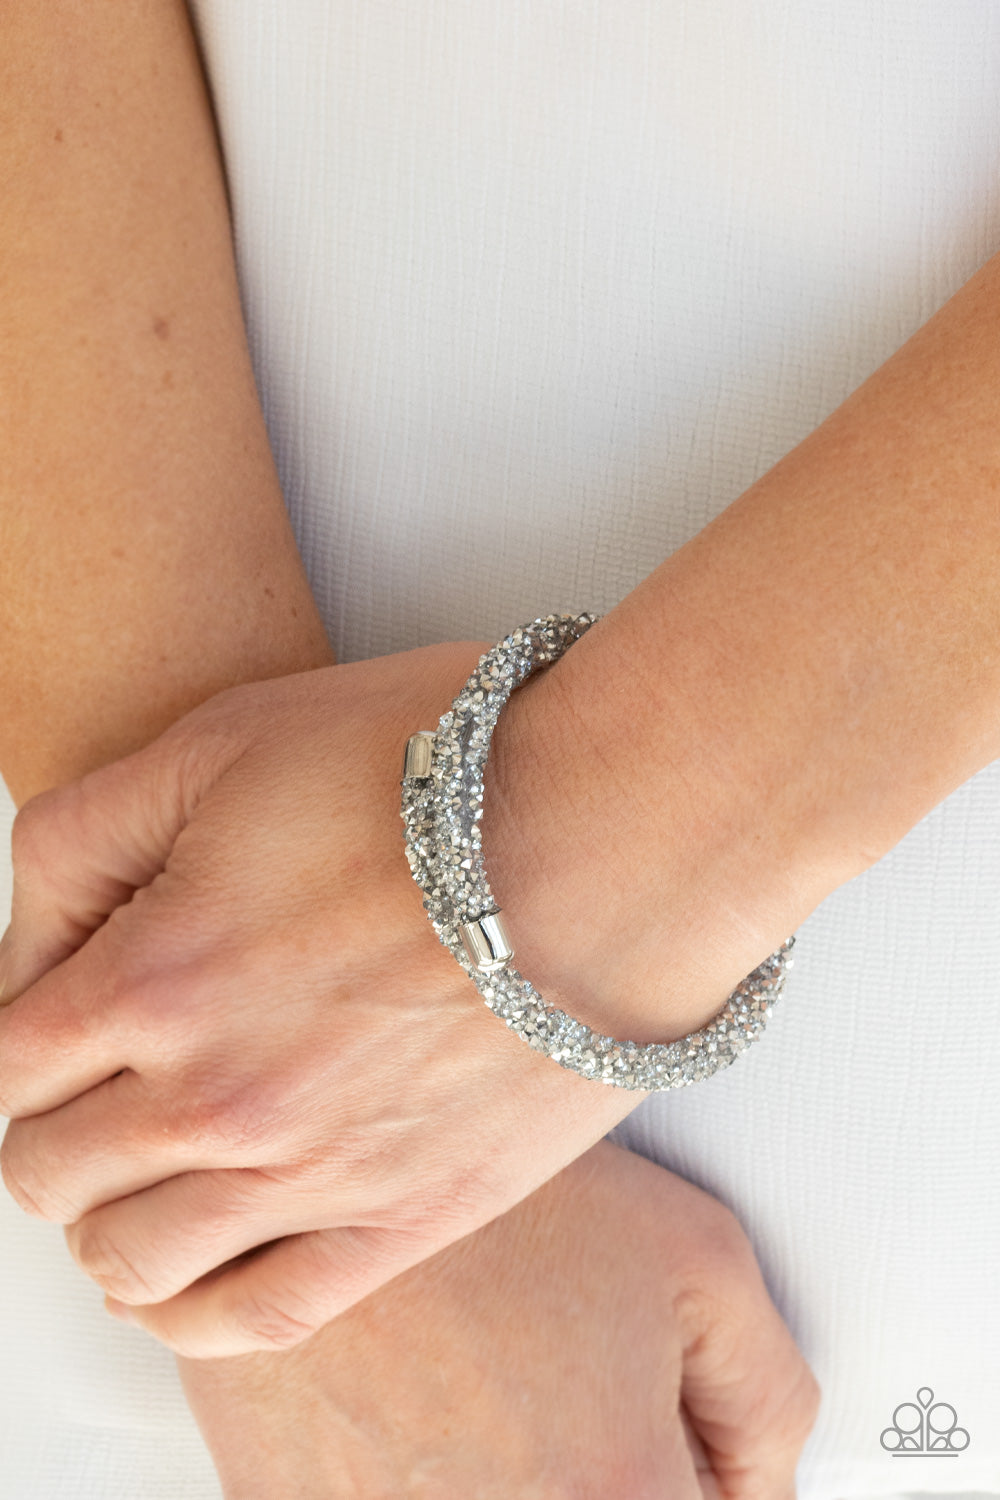 Paparazzi Roll Out The Glitz Silver Bangle Bracelet - Life Of The Party Exclusive August 2021